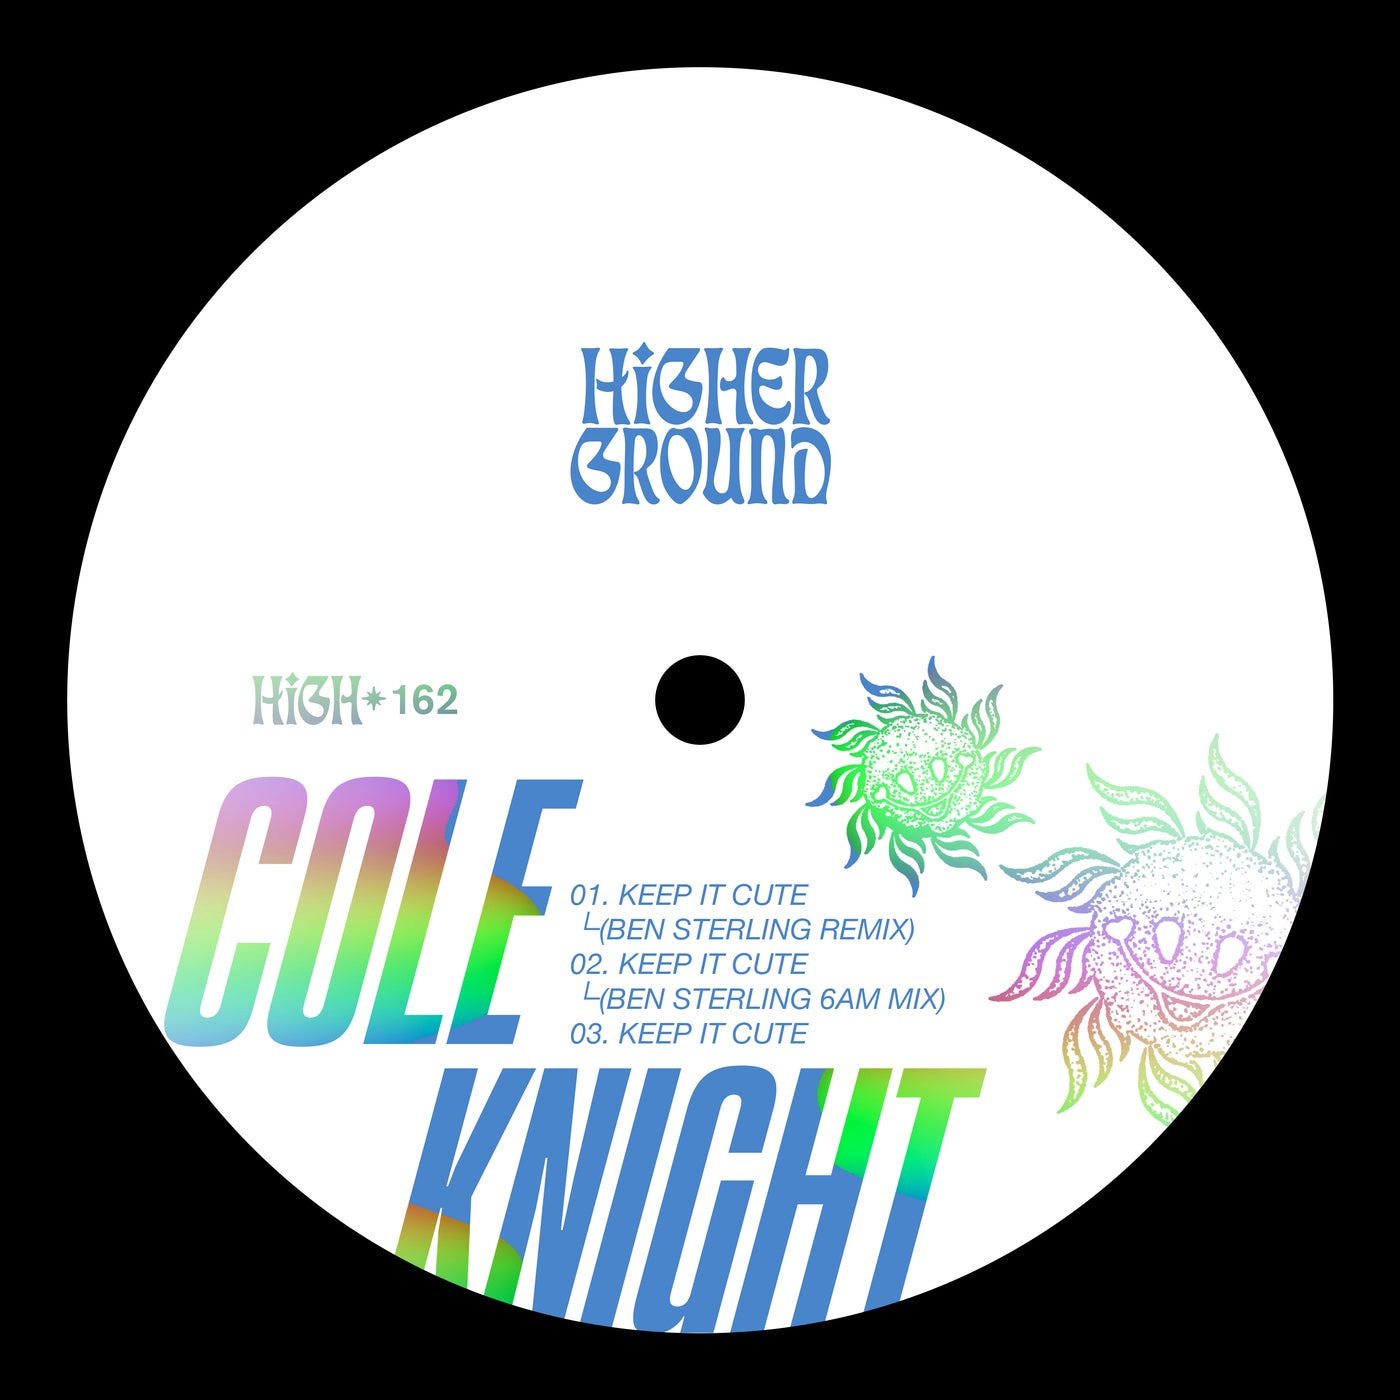 Cole Knight - Keep It Cute (Ben Sterling Remixes (Extended)) on Higher Ground